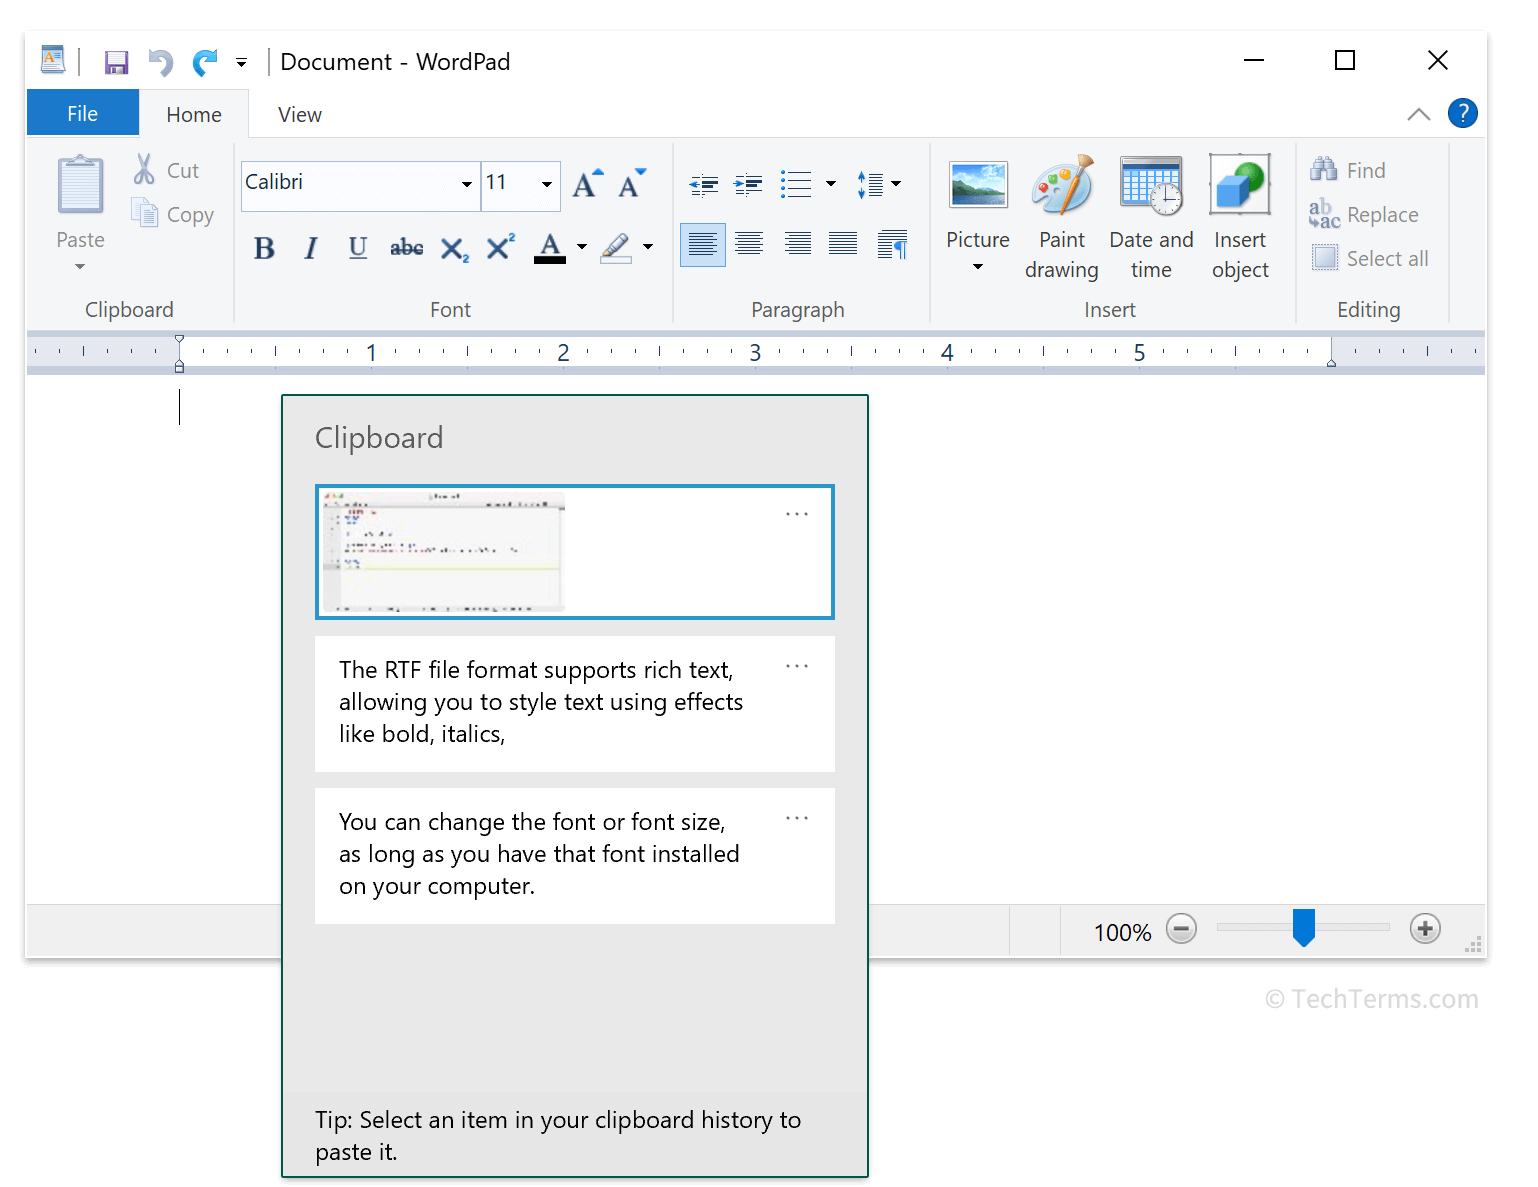 The Windows 10 Clipboard History feature